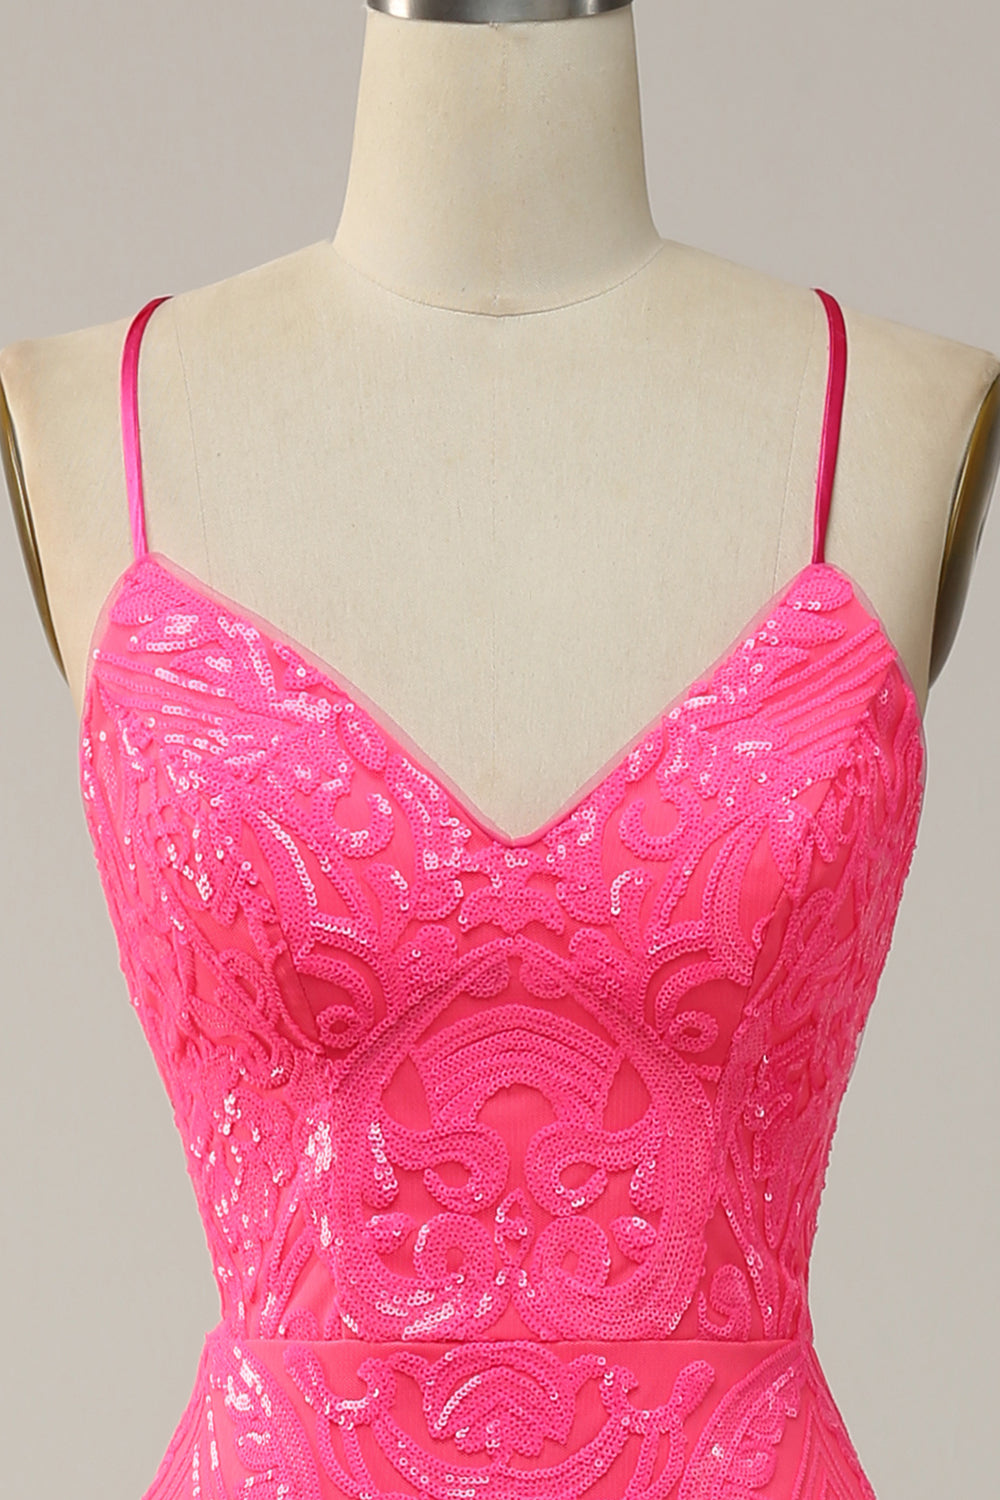 Mermaid Backless Hot Pink Sequins Long Prom Dress